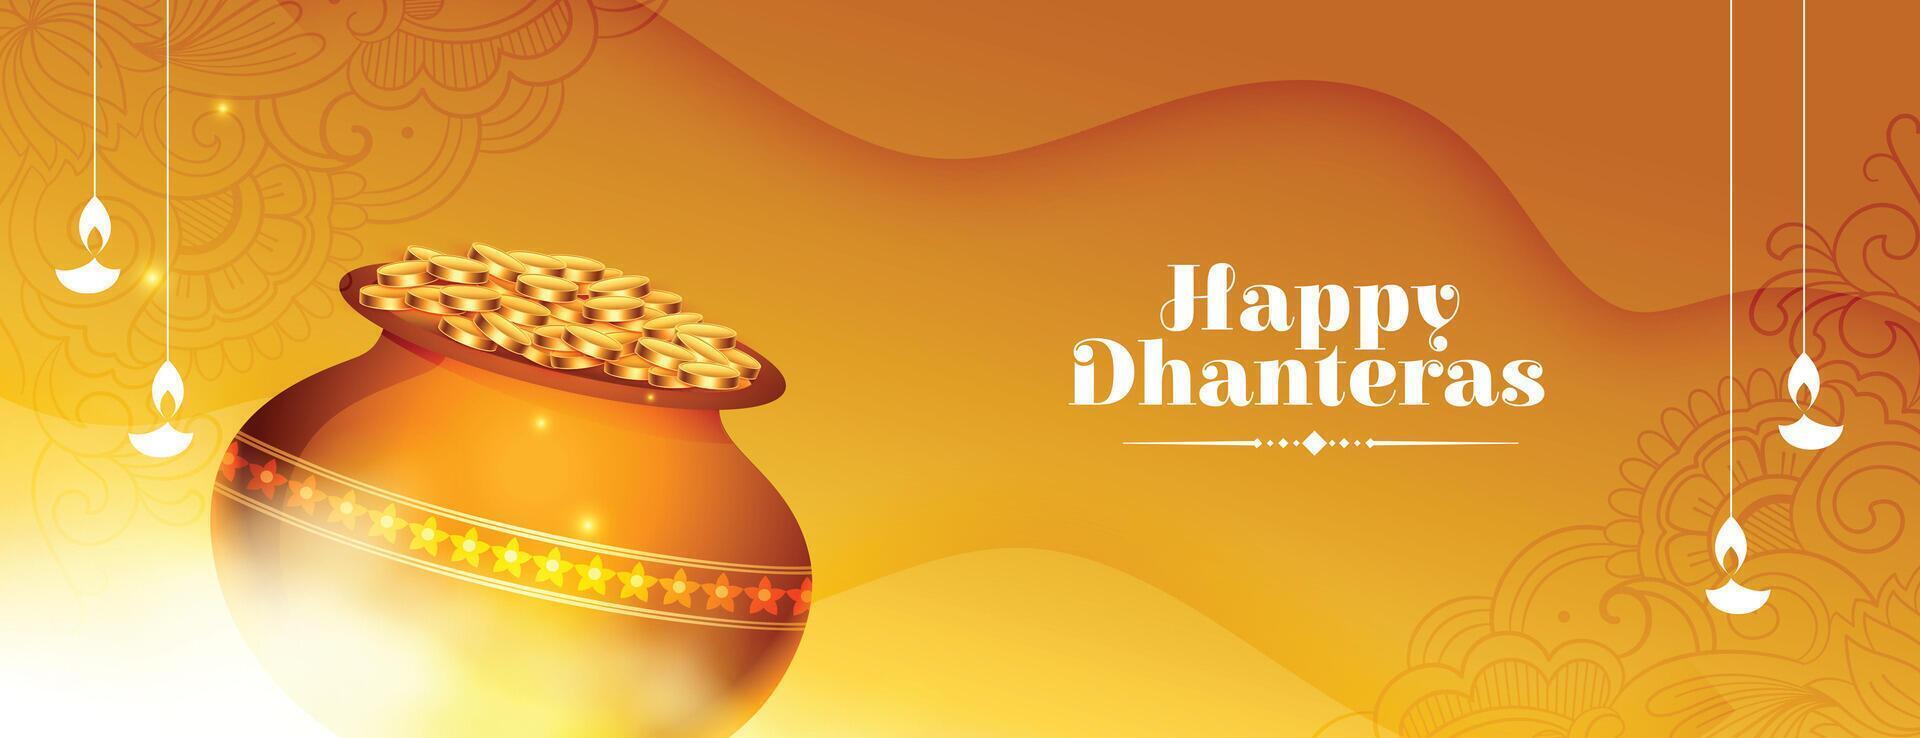 happy dhanteras spiritual banner welcoming wealth and prosperity vector